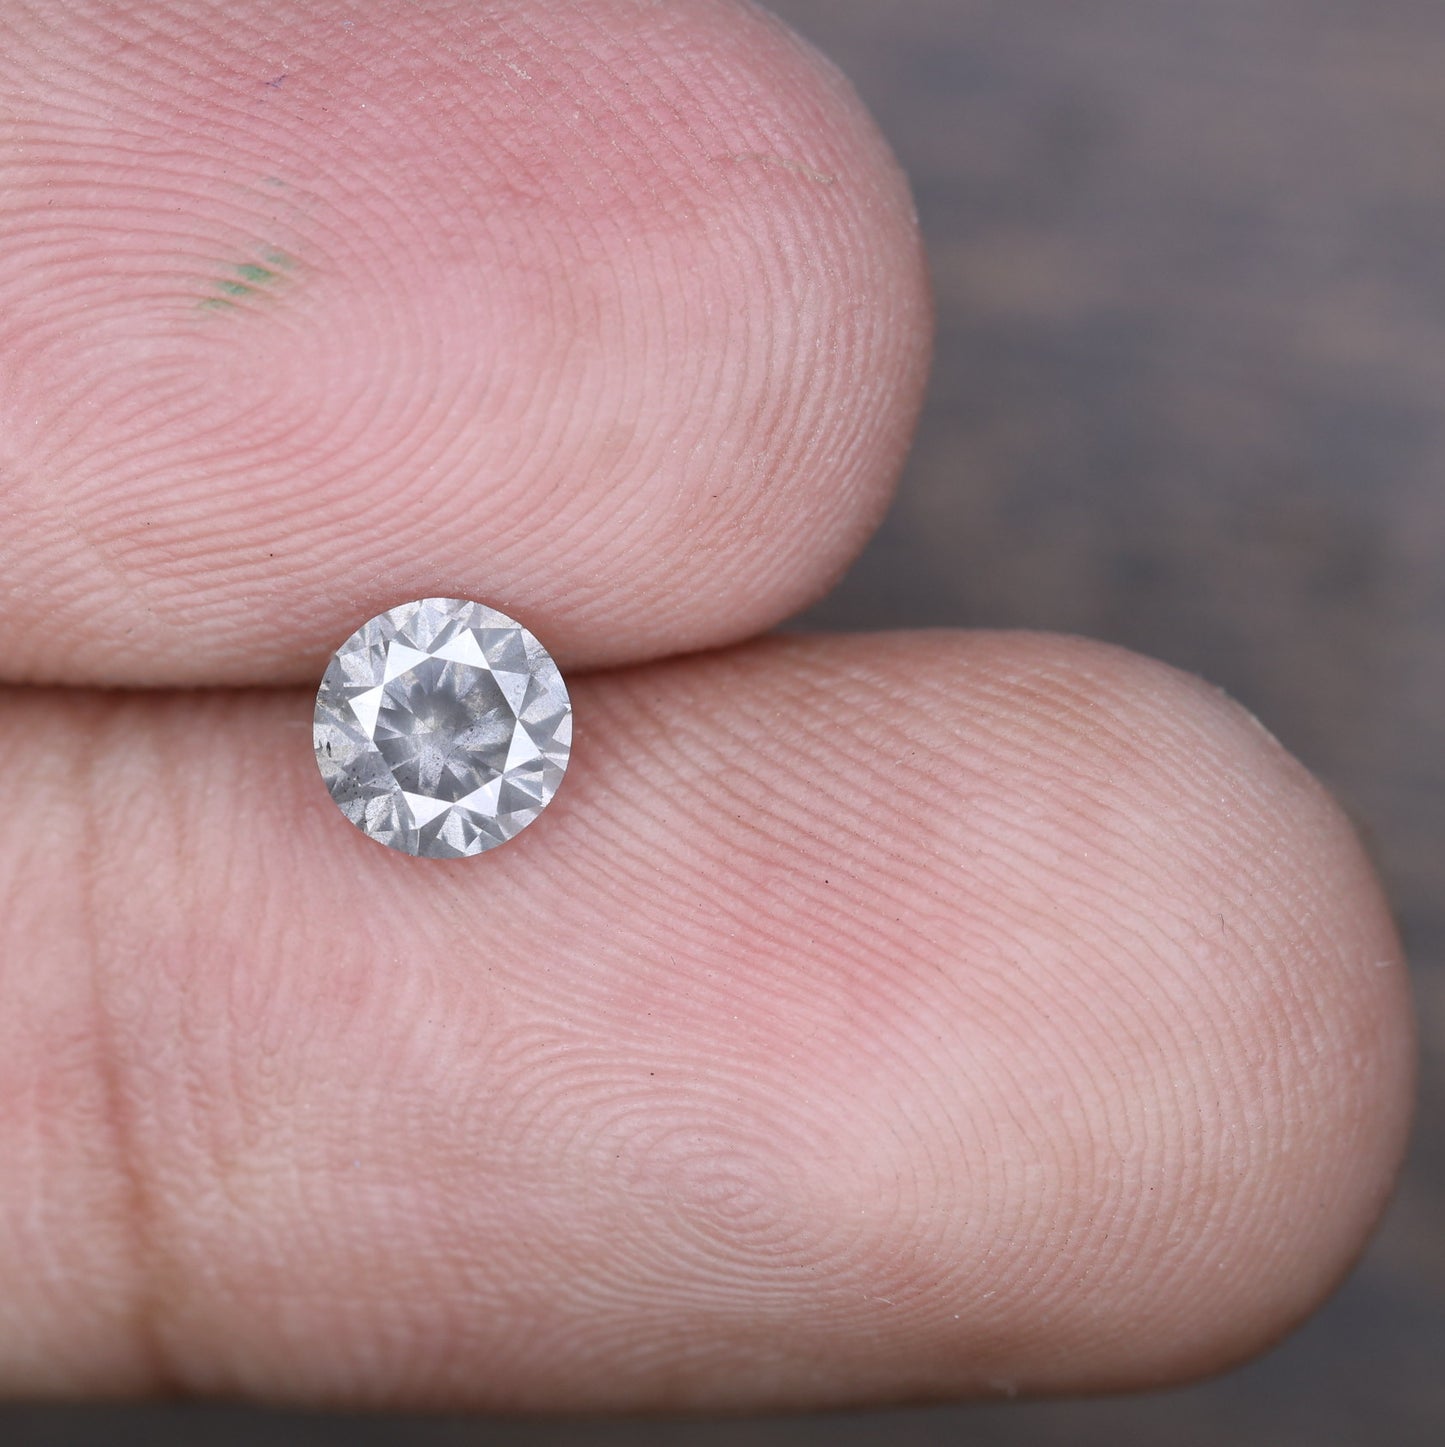 0.61 CT 5.30 x 3.30 MM Natural SaltAnd Pepper Round Briliant Cut Diamond For Necklace